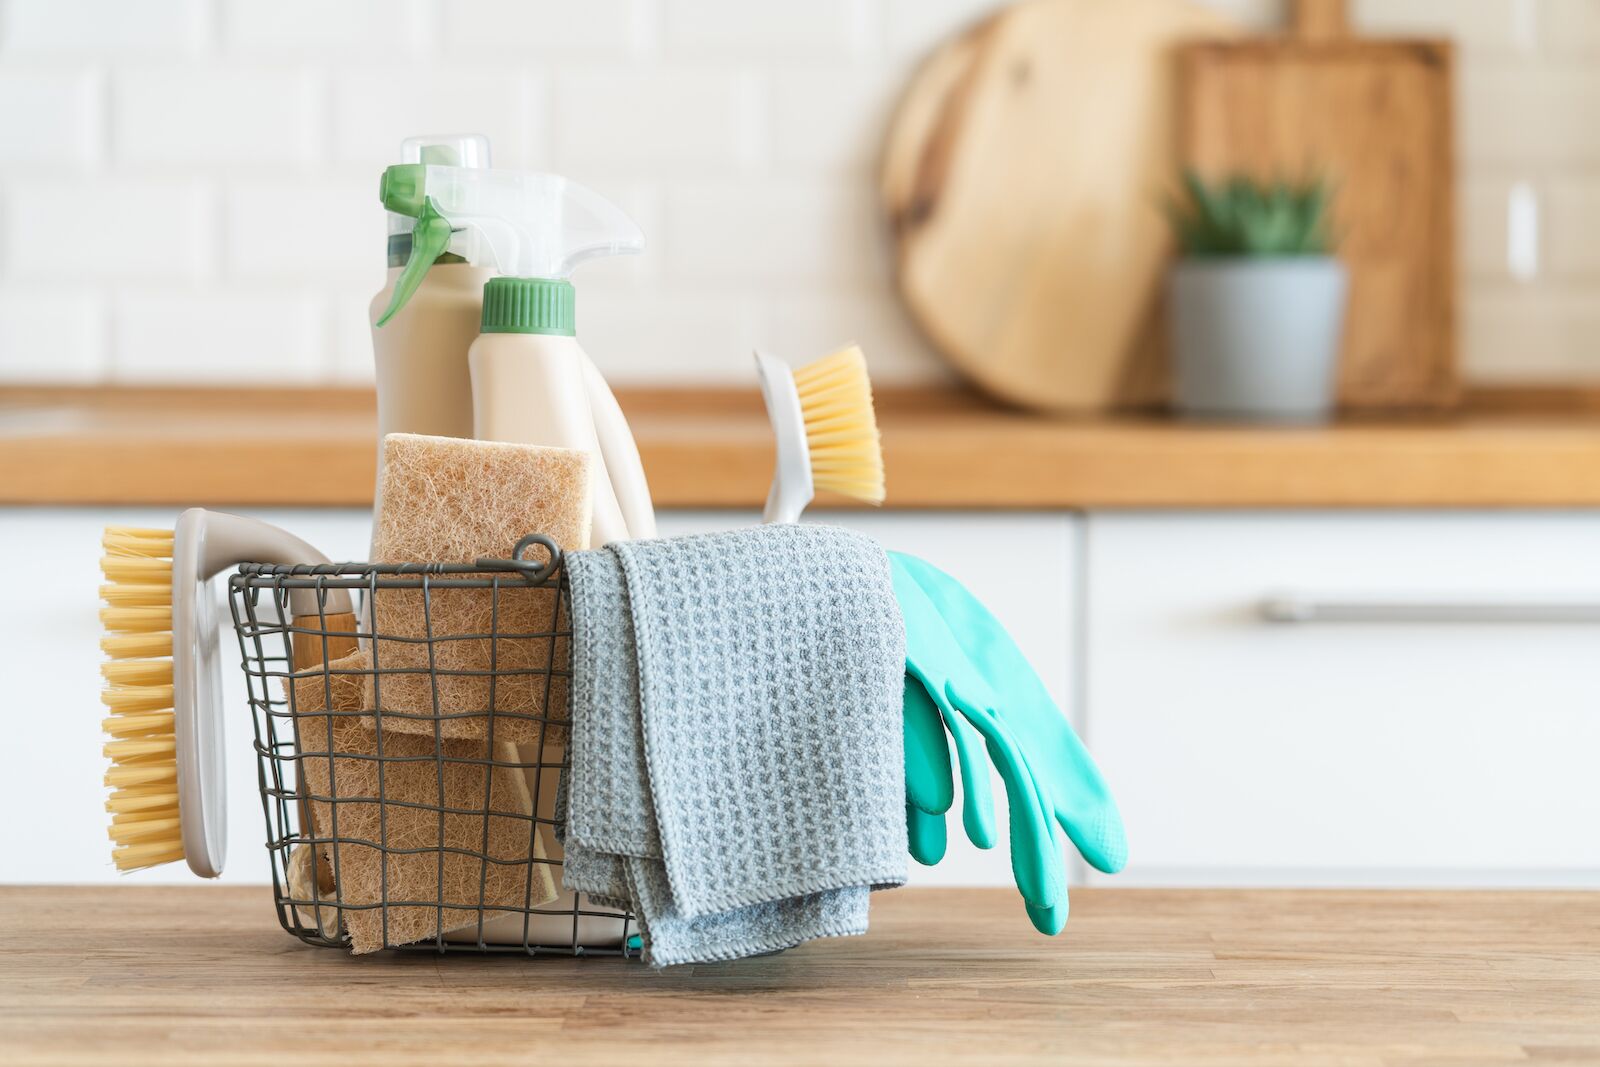 cleaning supplies in Airbnb